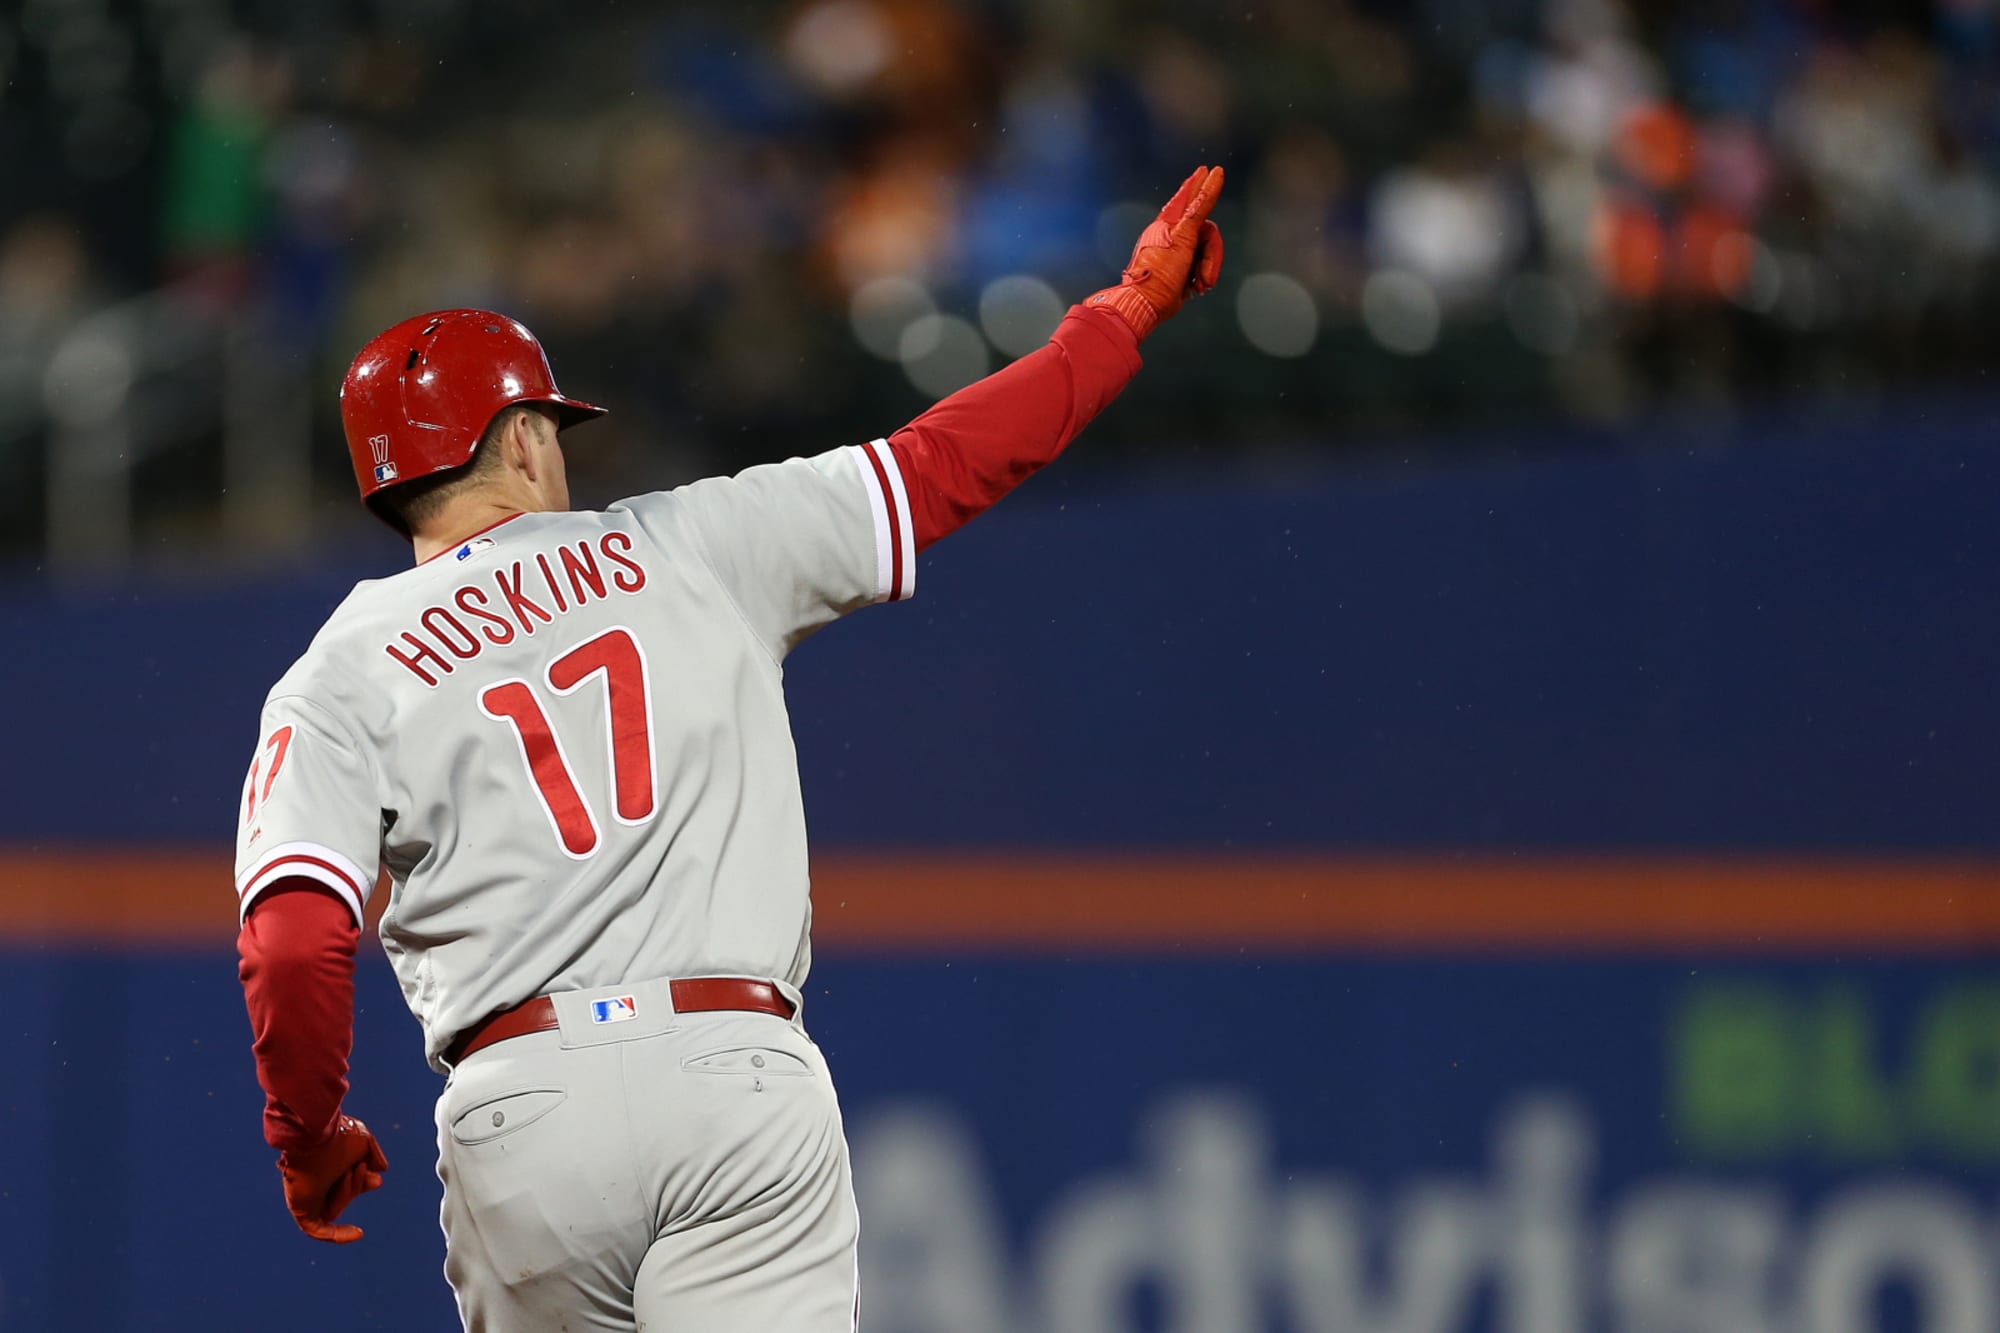 Phillies: Rhys Hoskins setting baseline for future expectations